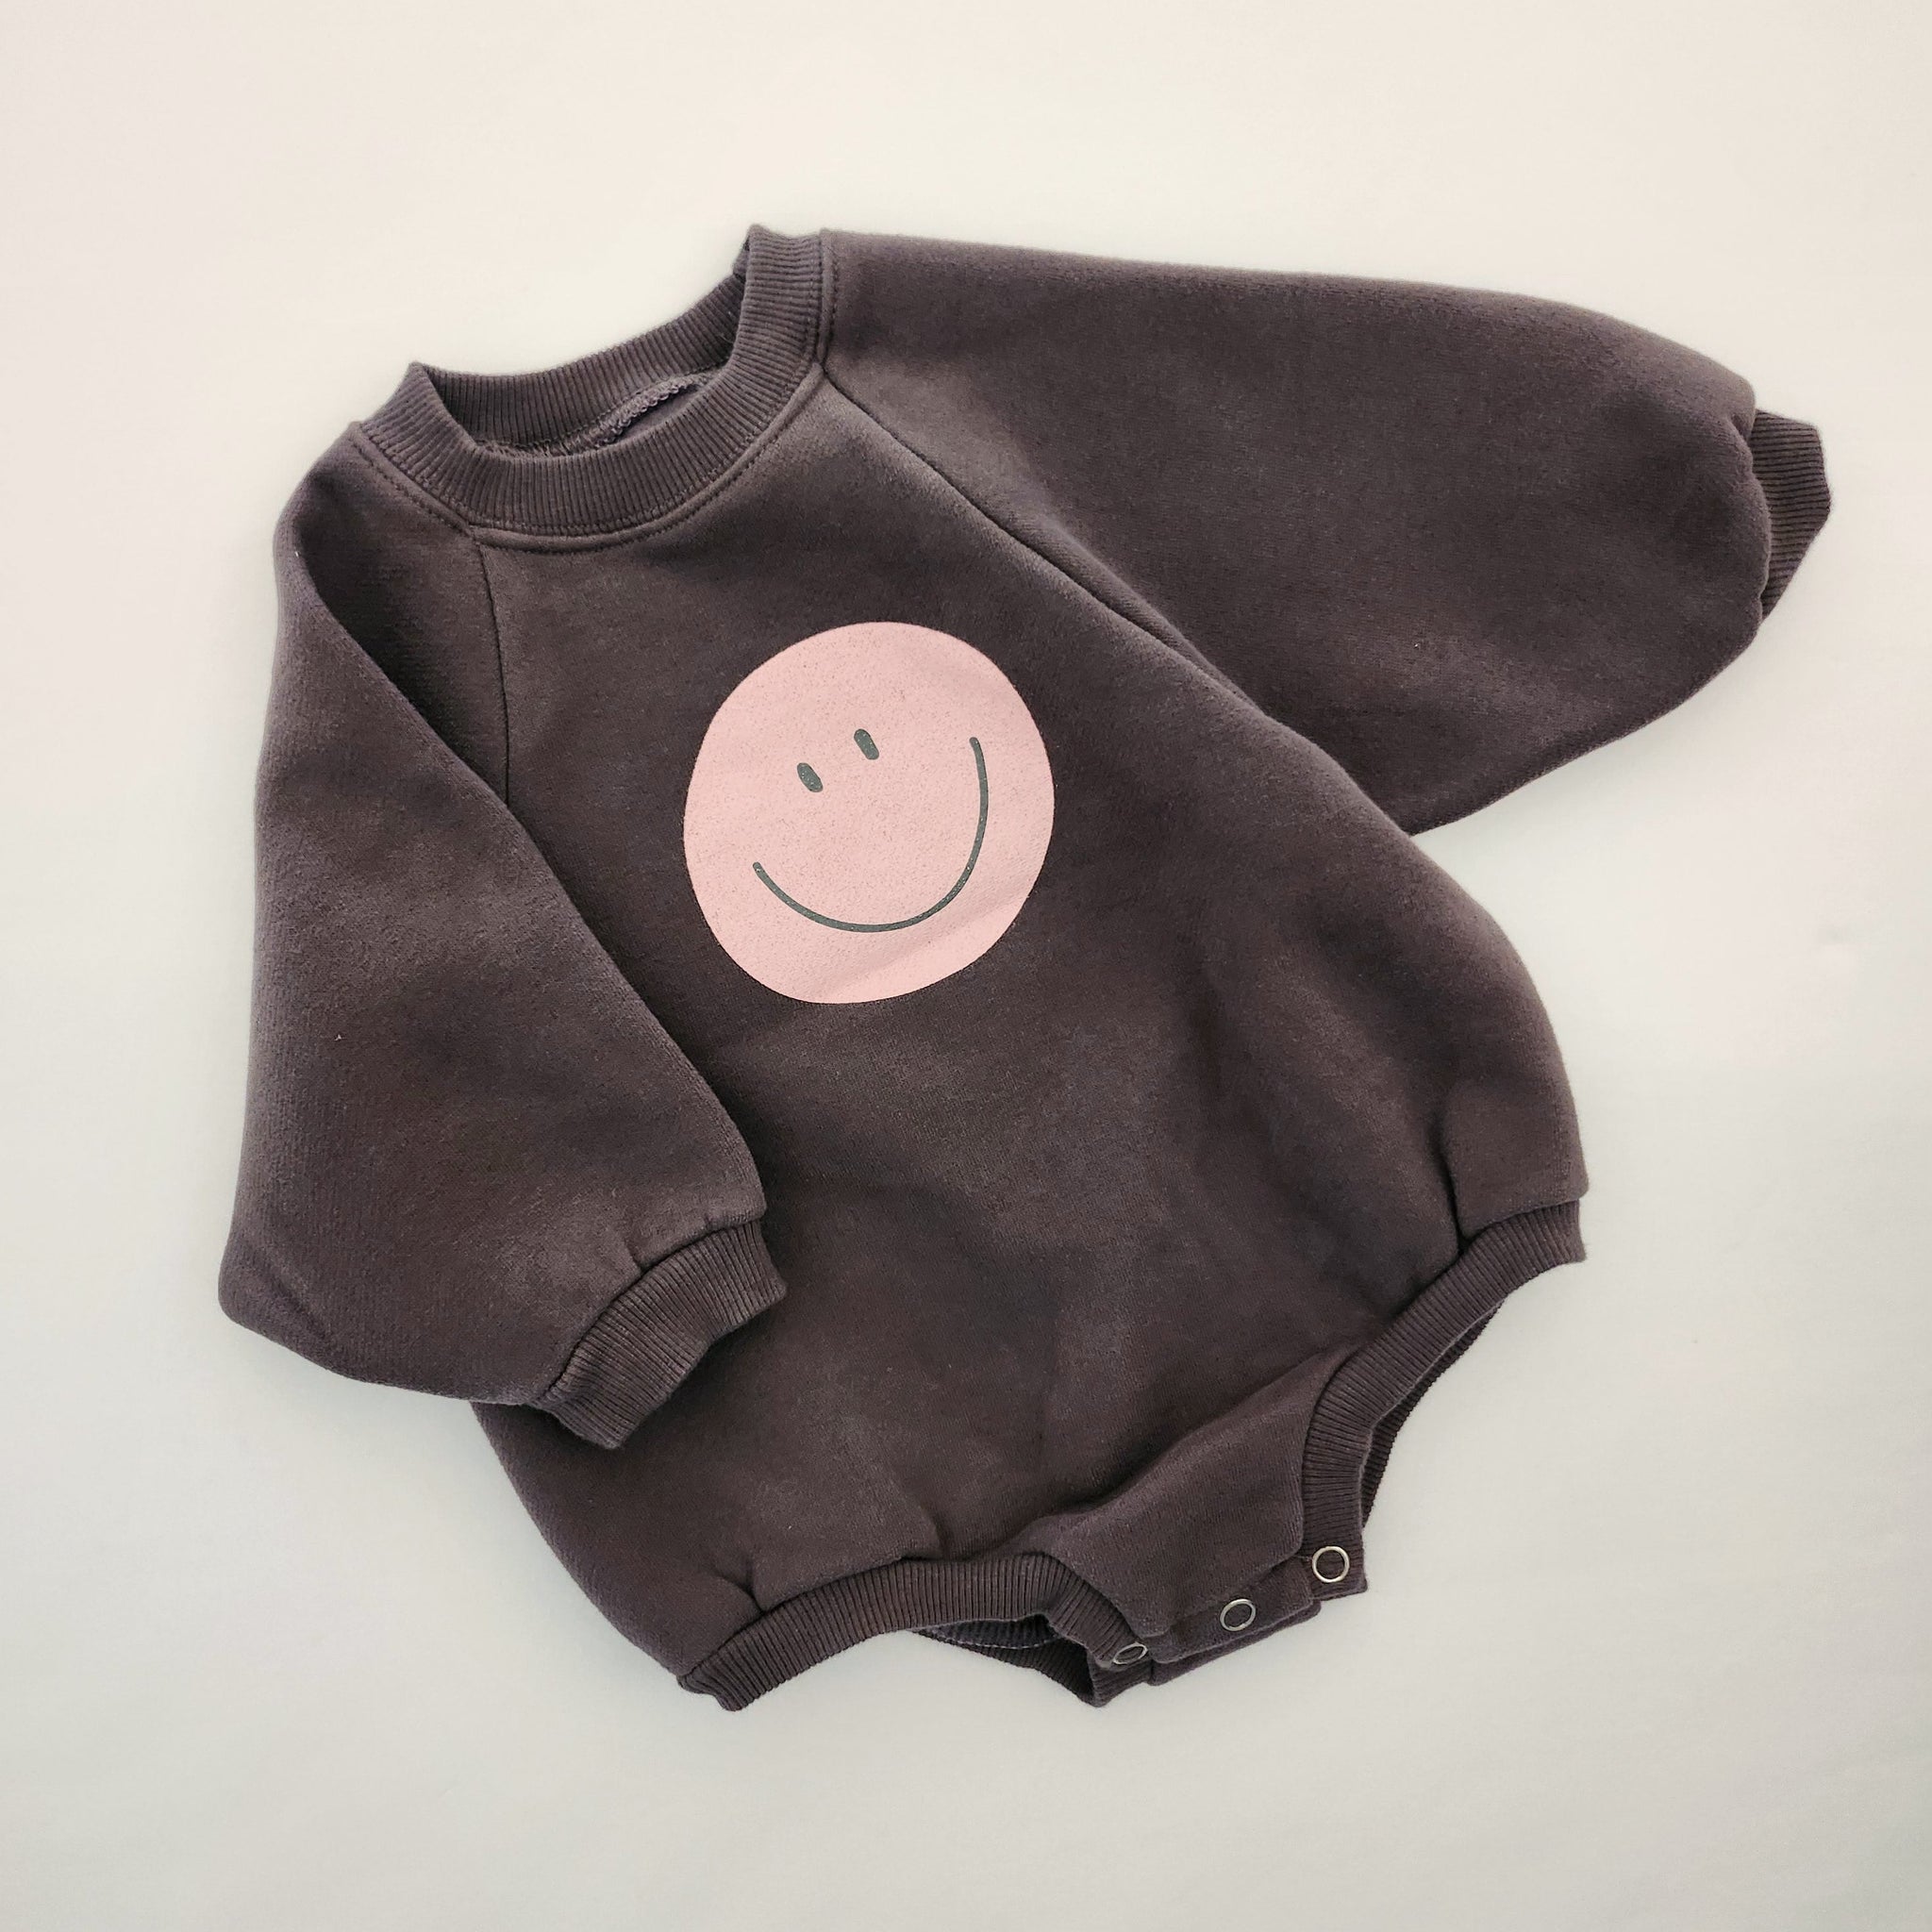 Baby Land Smiley Face Brushed Cotton Sweatshirt Romper (4-15m) - Charcoal